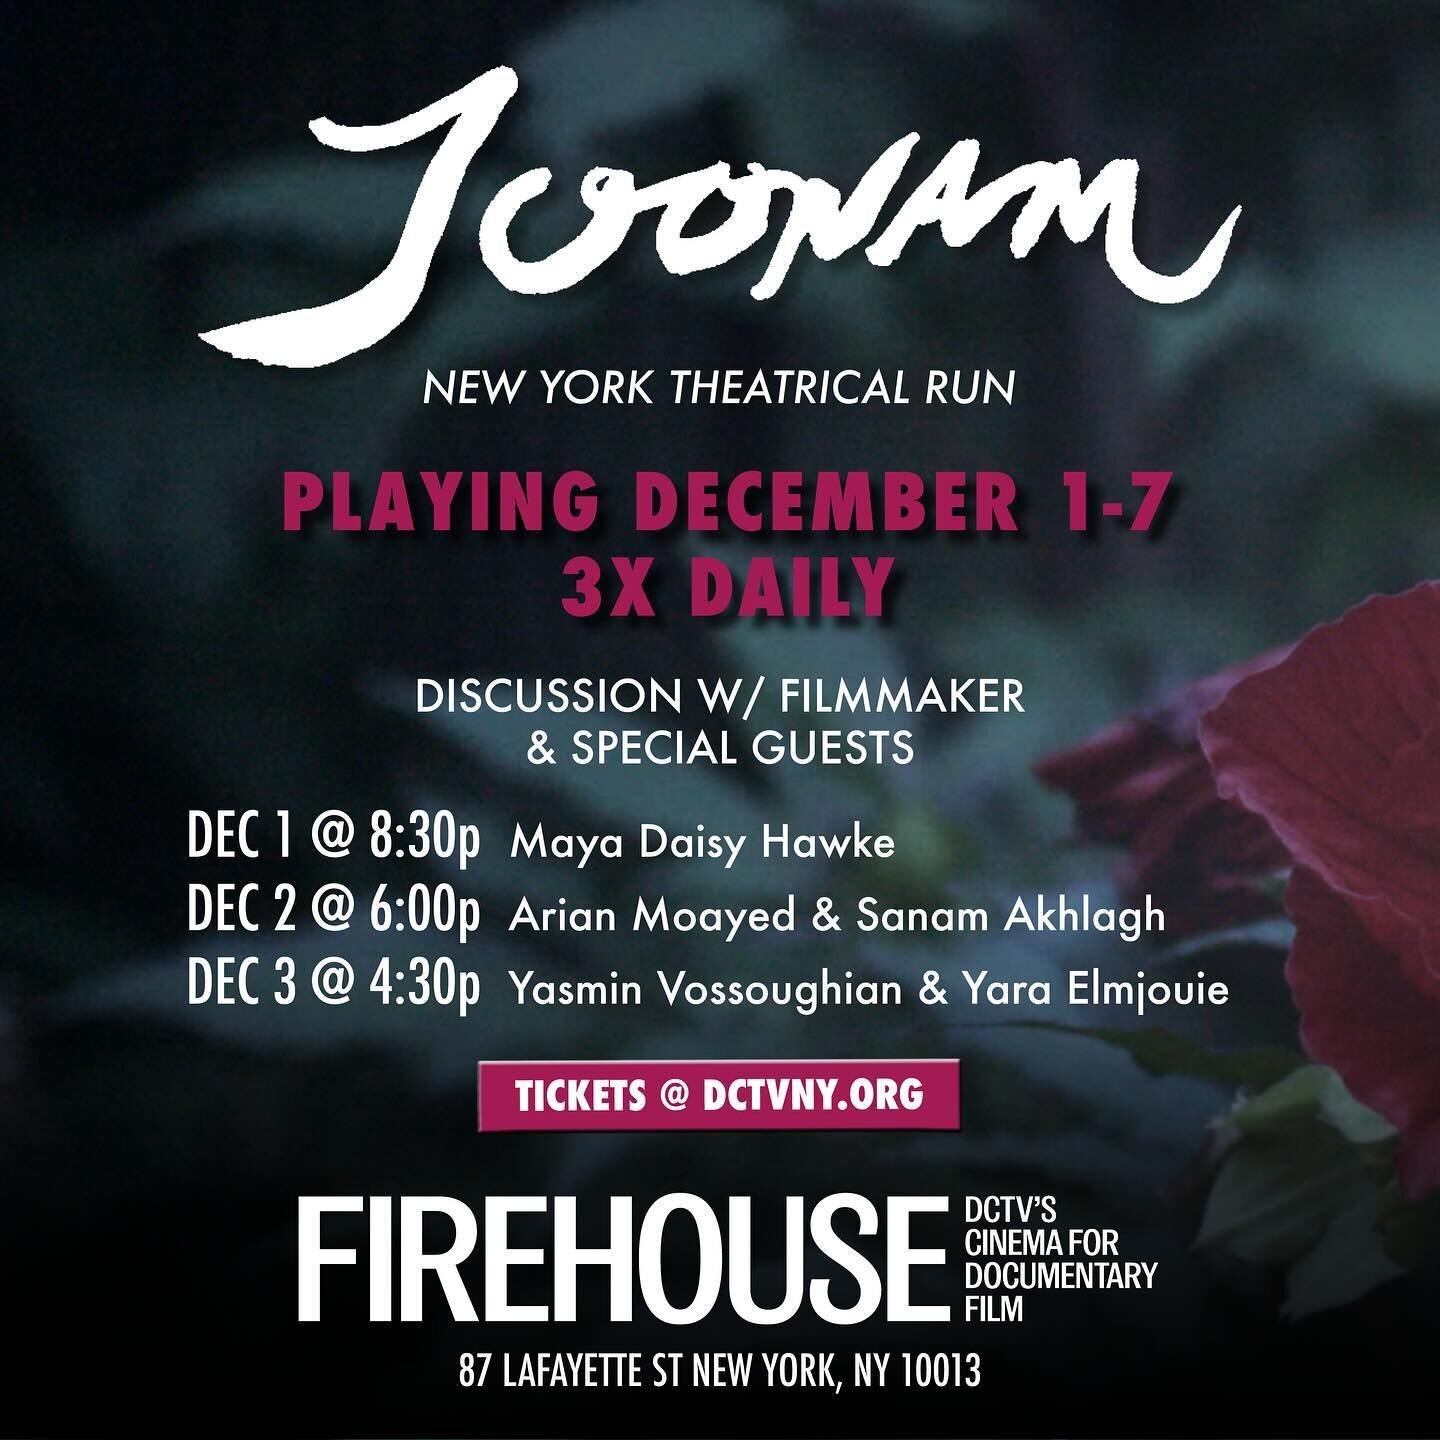 JOONAM opens theatrically in NYC Dec 1-7 @dctvny ! 🎟️ Tickets available online &amp; at the link in our bio. ✨ We have three extra special screenings lined up, including post screening Q&amp;As with Joonam director, Sierra Urich, in conversation wit